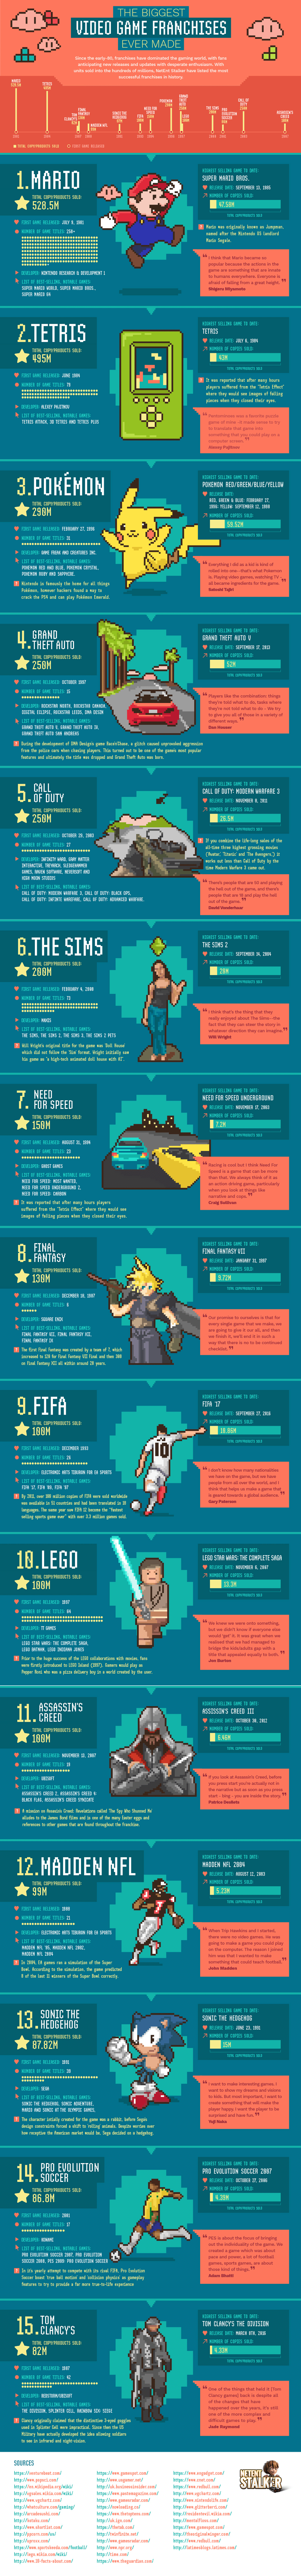 Video Game Franchises Infographic